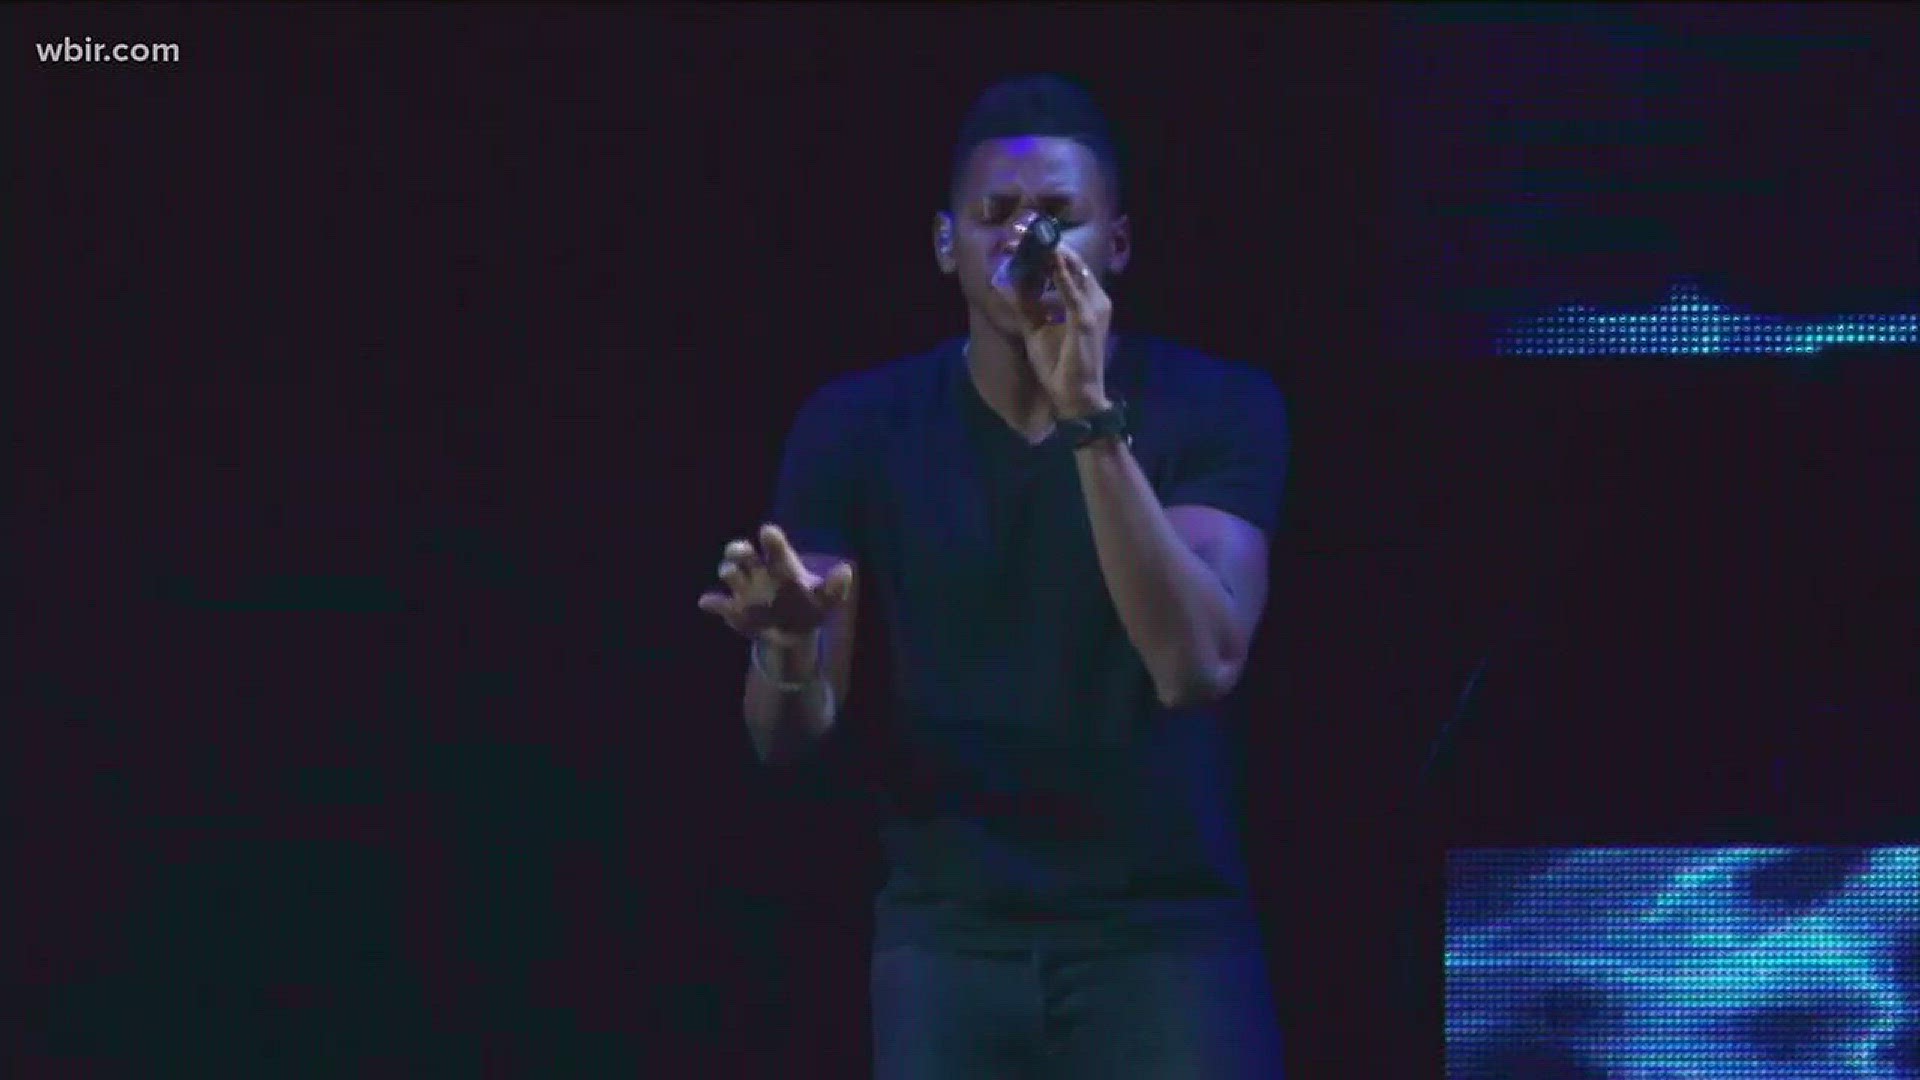 Season 12 winner of the Voice Chris Blue sung at Cokesbury Church Sunday afternoon. He's working on his debut album.